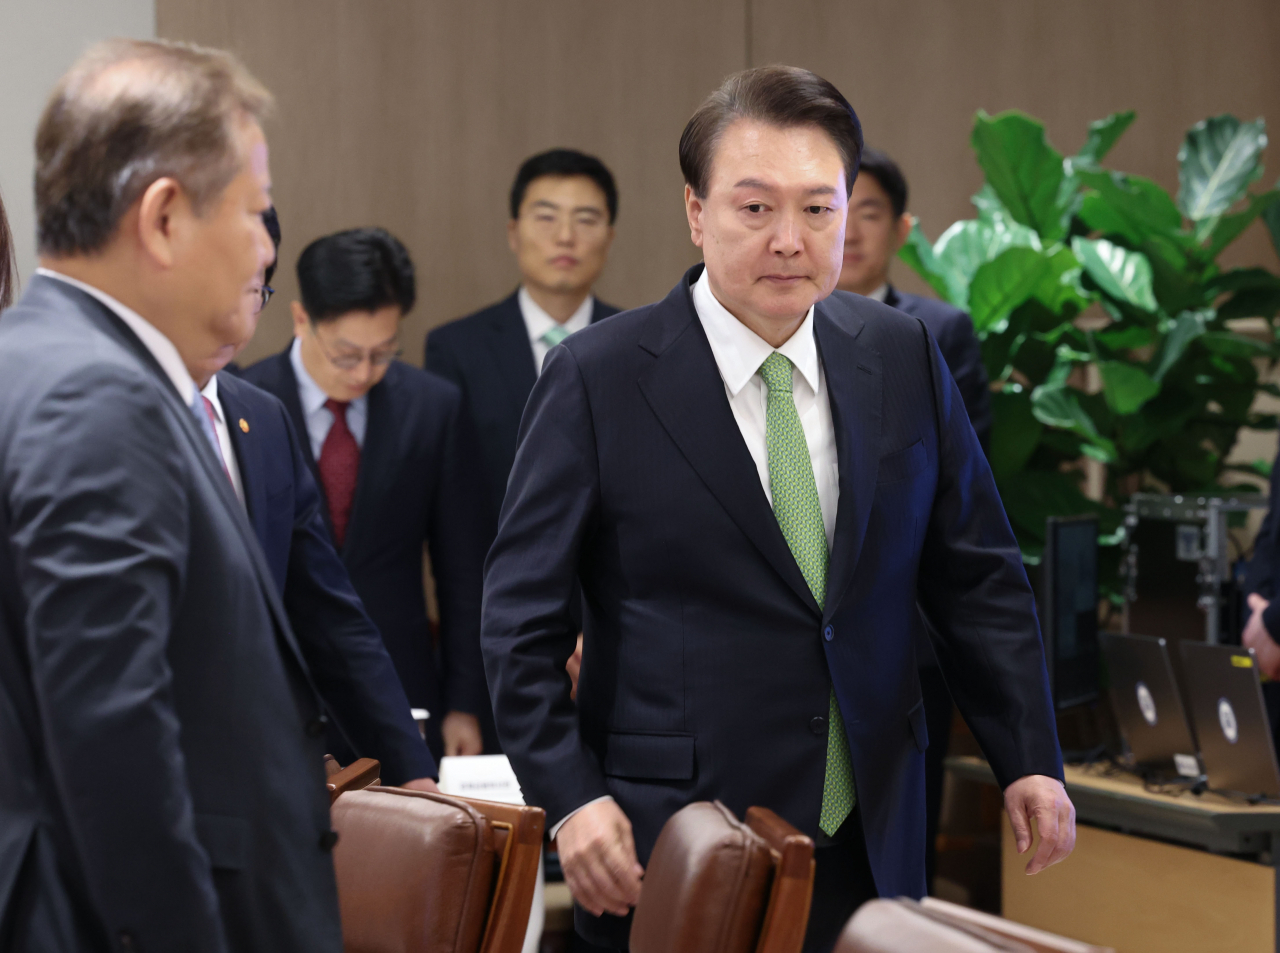 President Yoon Suk Yeol (right, wearing a light green tie) enters a meeting room in his office in Seoul as he presided over the meeting to monitor the nation's housing supply on Monday. (Yonhap)